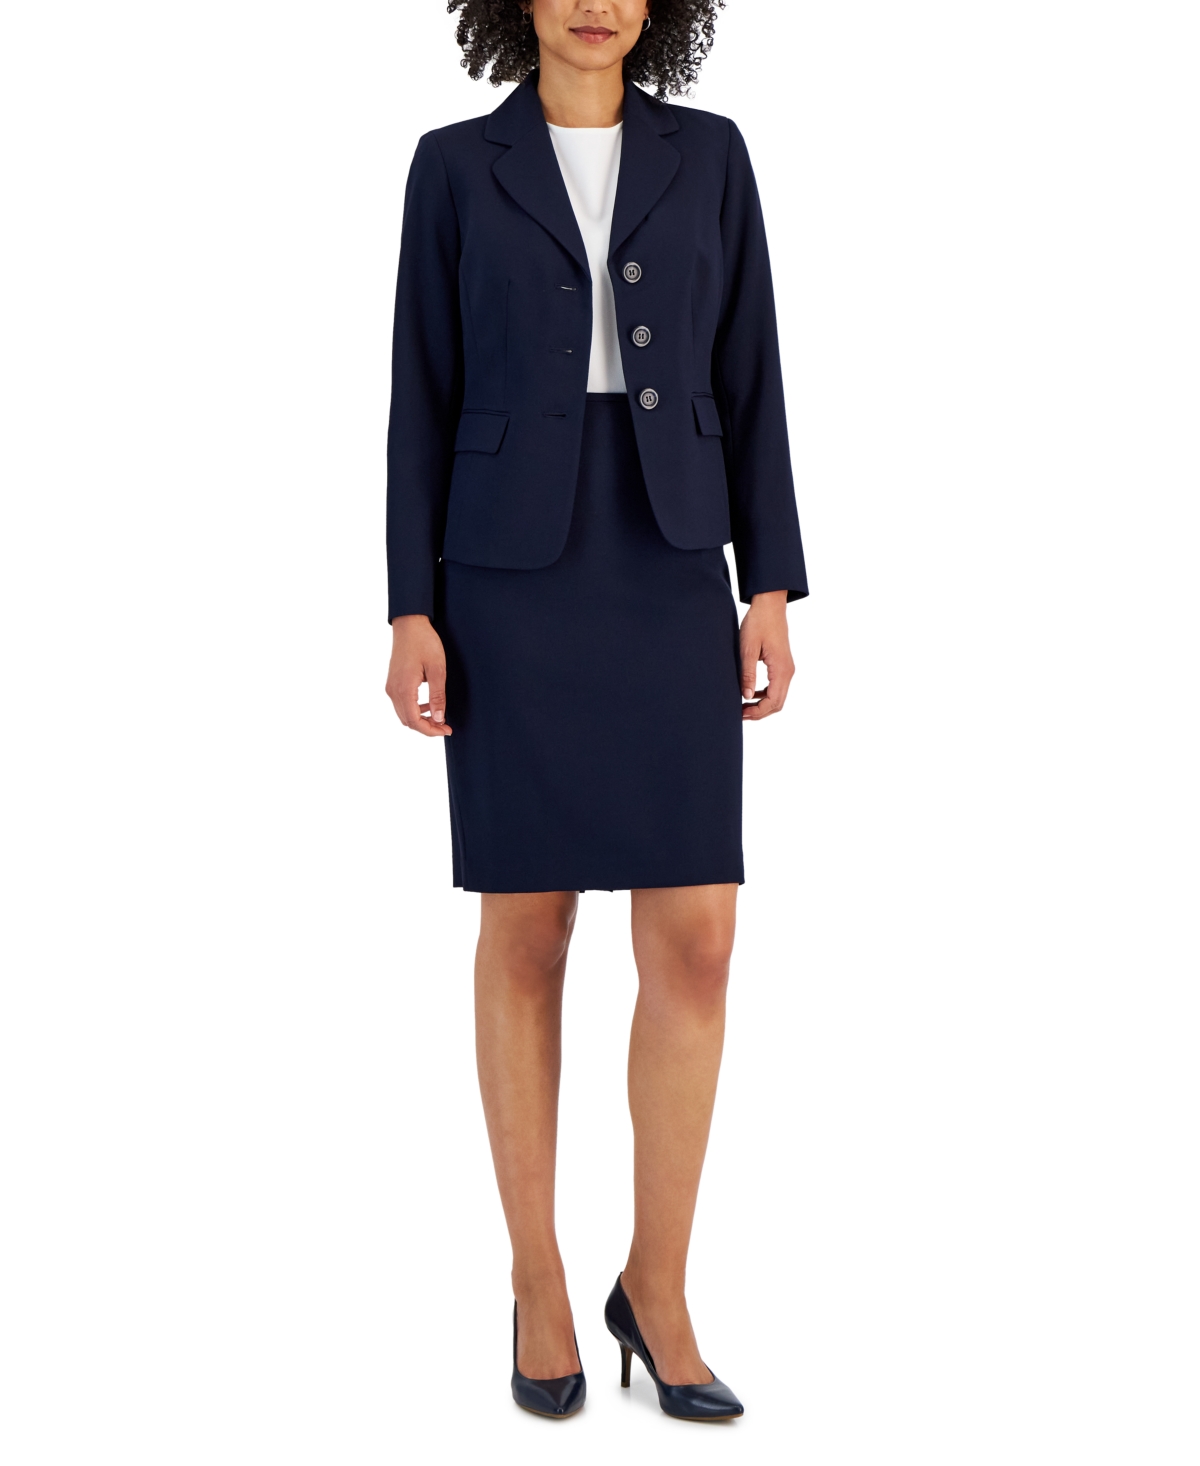 Le Suit Women's Notch-collar Three-button Skirt Suit In Navy